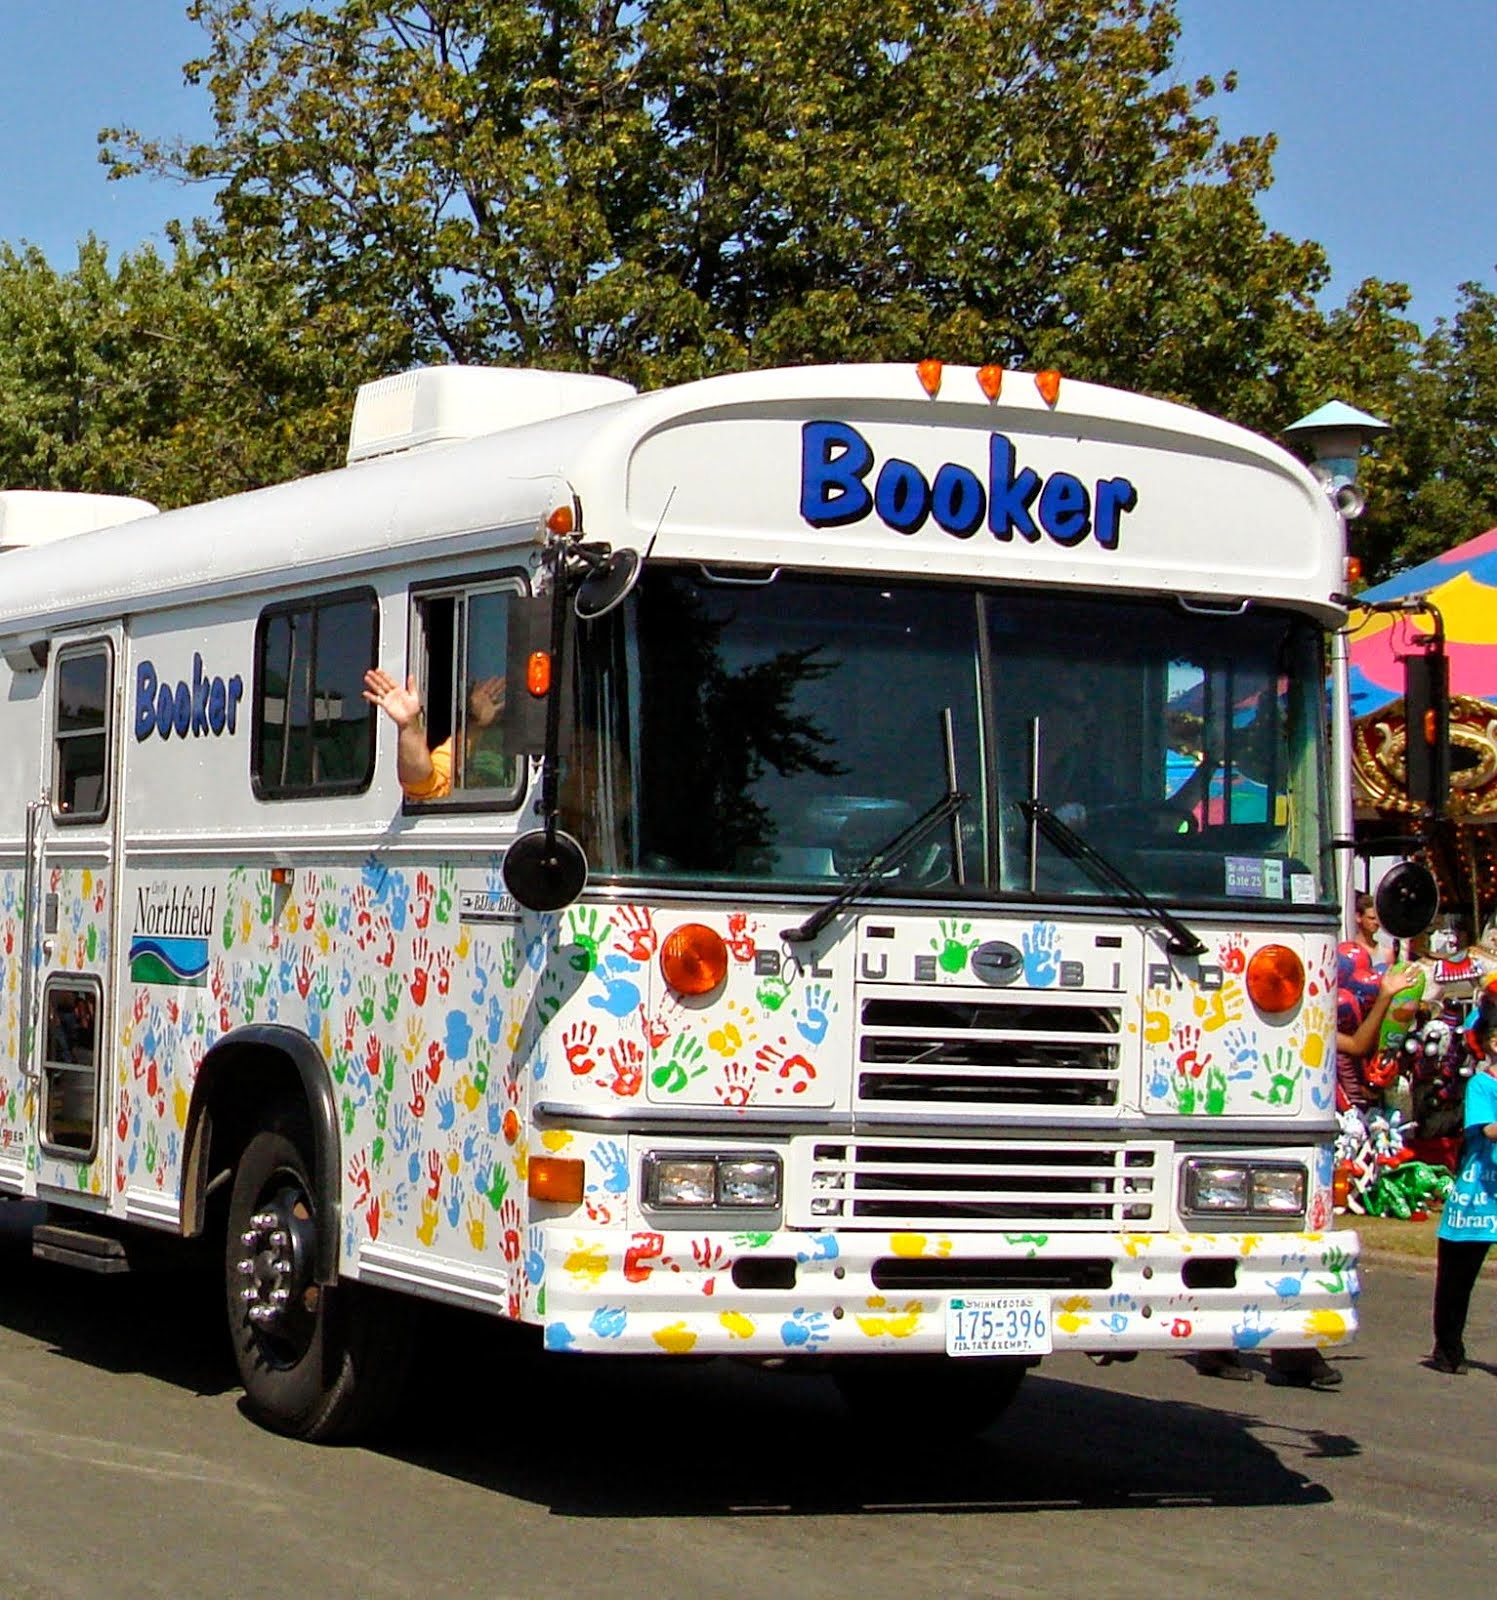 Booker, the Book Bus will be out in the community all summer!